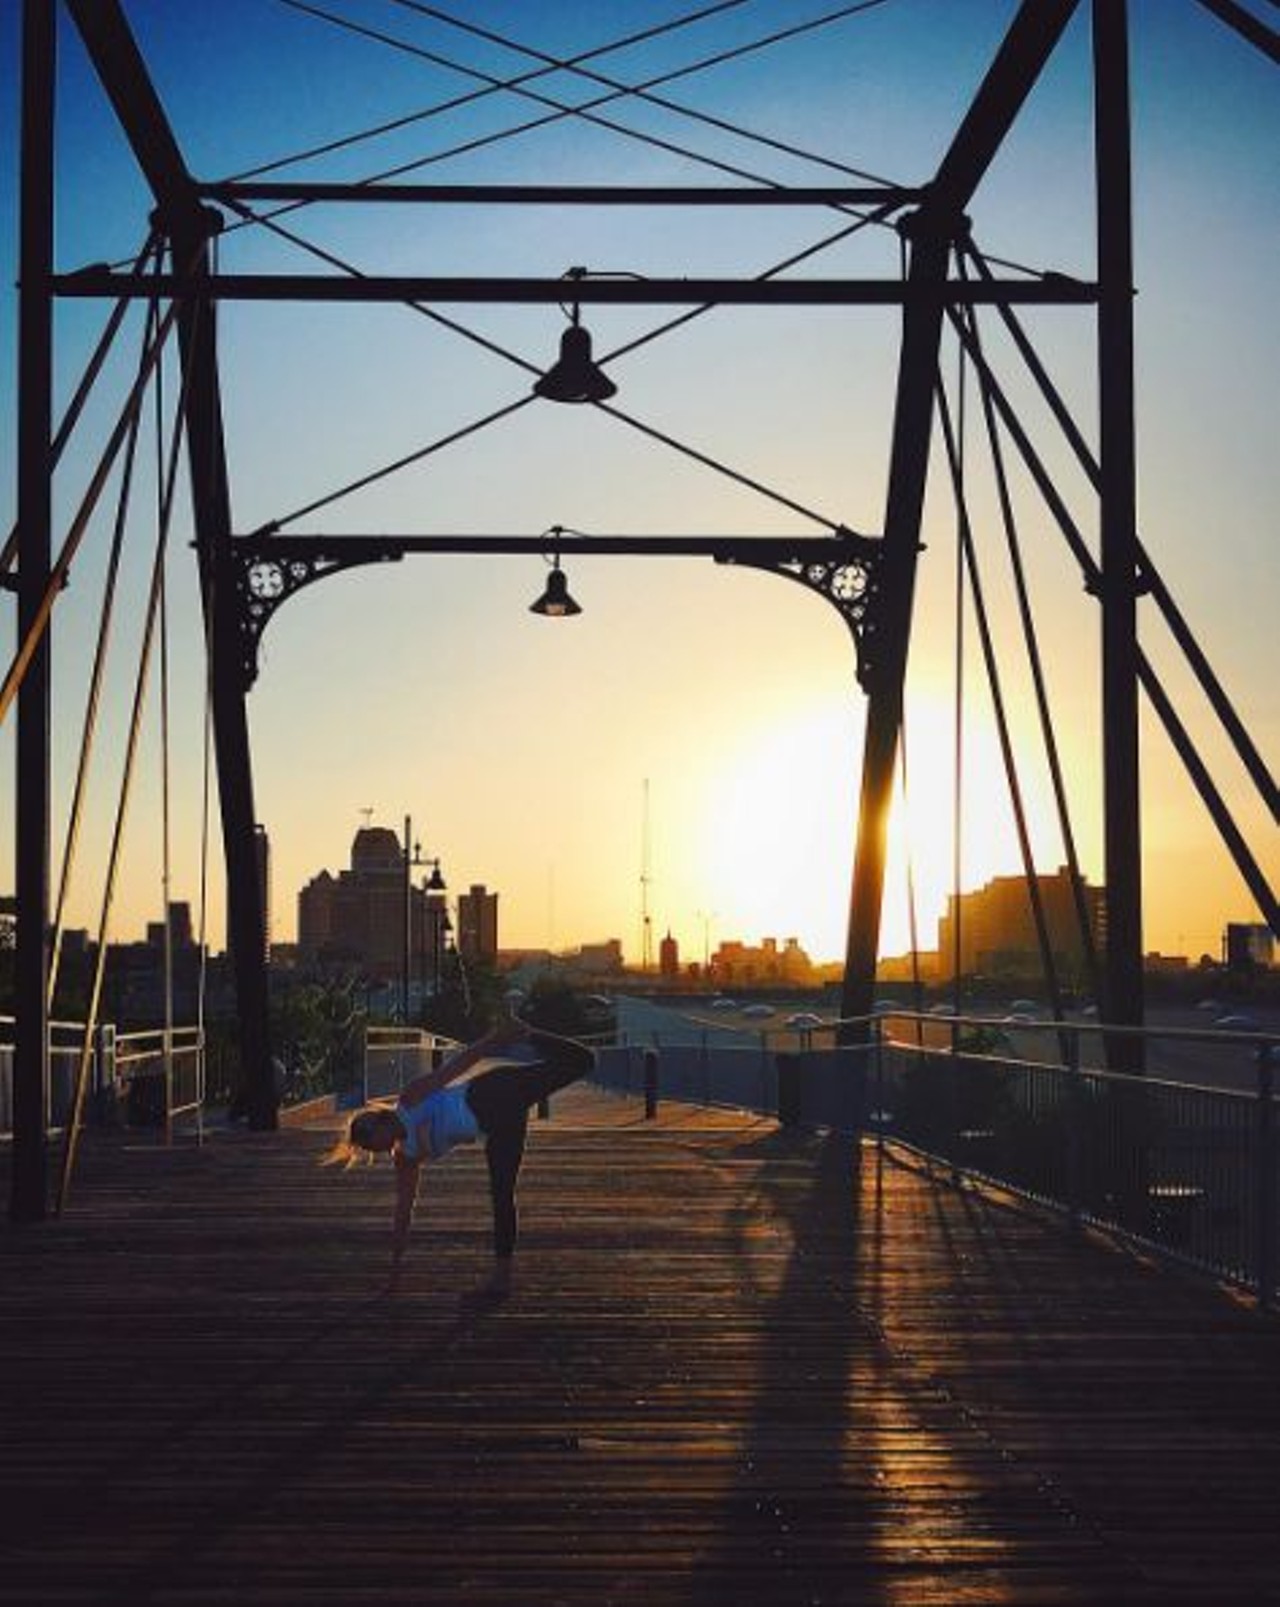 Watch the sunset from Hays Street Bridge
803 N. Cherry St., (210) 207-0970, facebook.com
San Antonio&#146;s favorite bridge is a prime spot for yoga and photoshoots, so why wouldn&#146;t you admire the beautiful Texas sky from here?
Photo via Instagram, hayleytheyogi